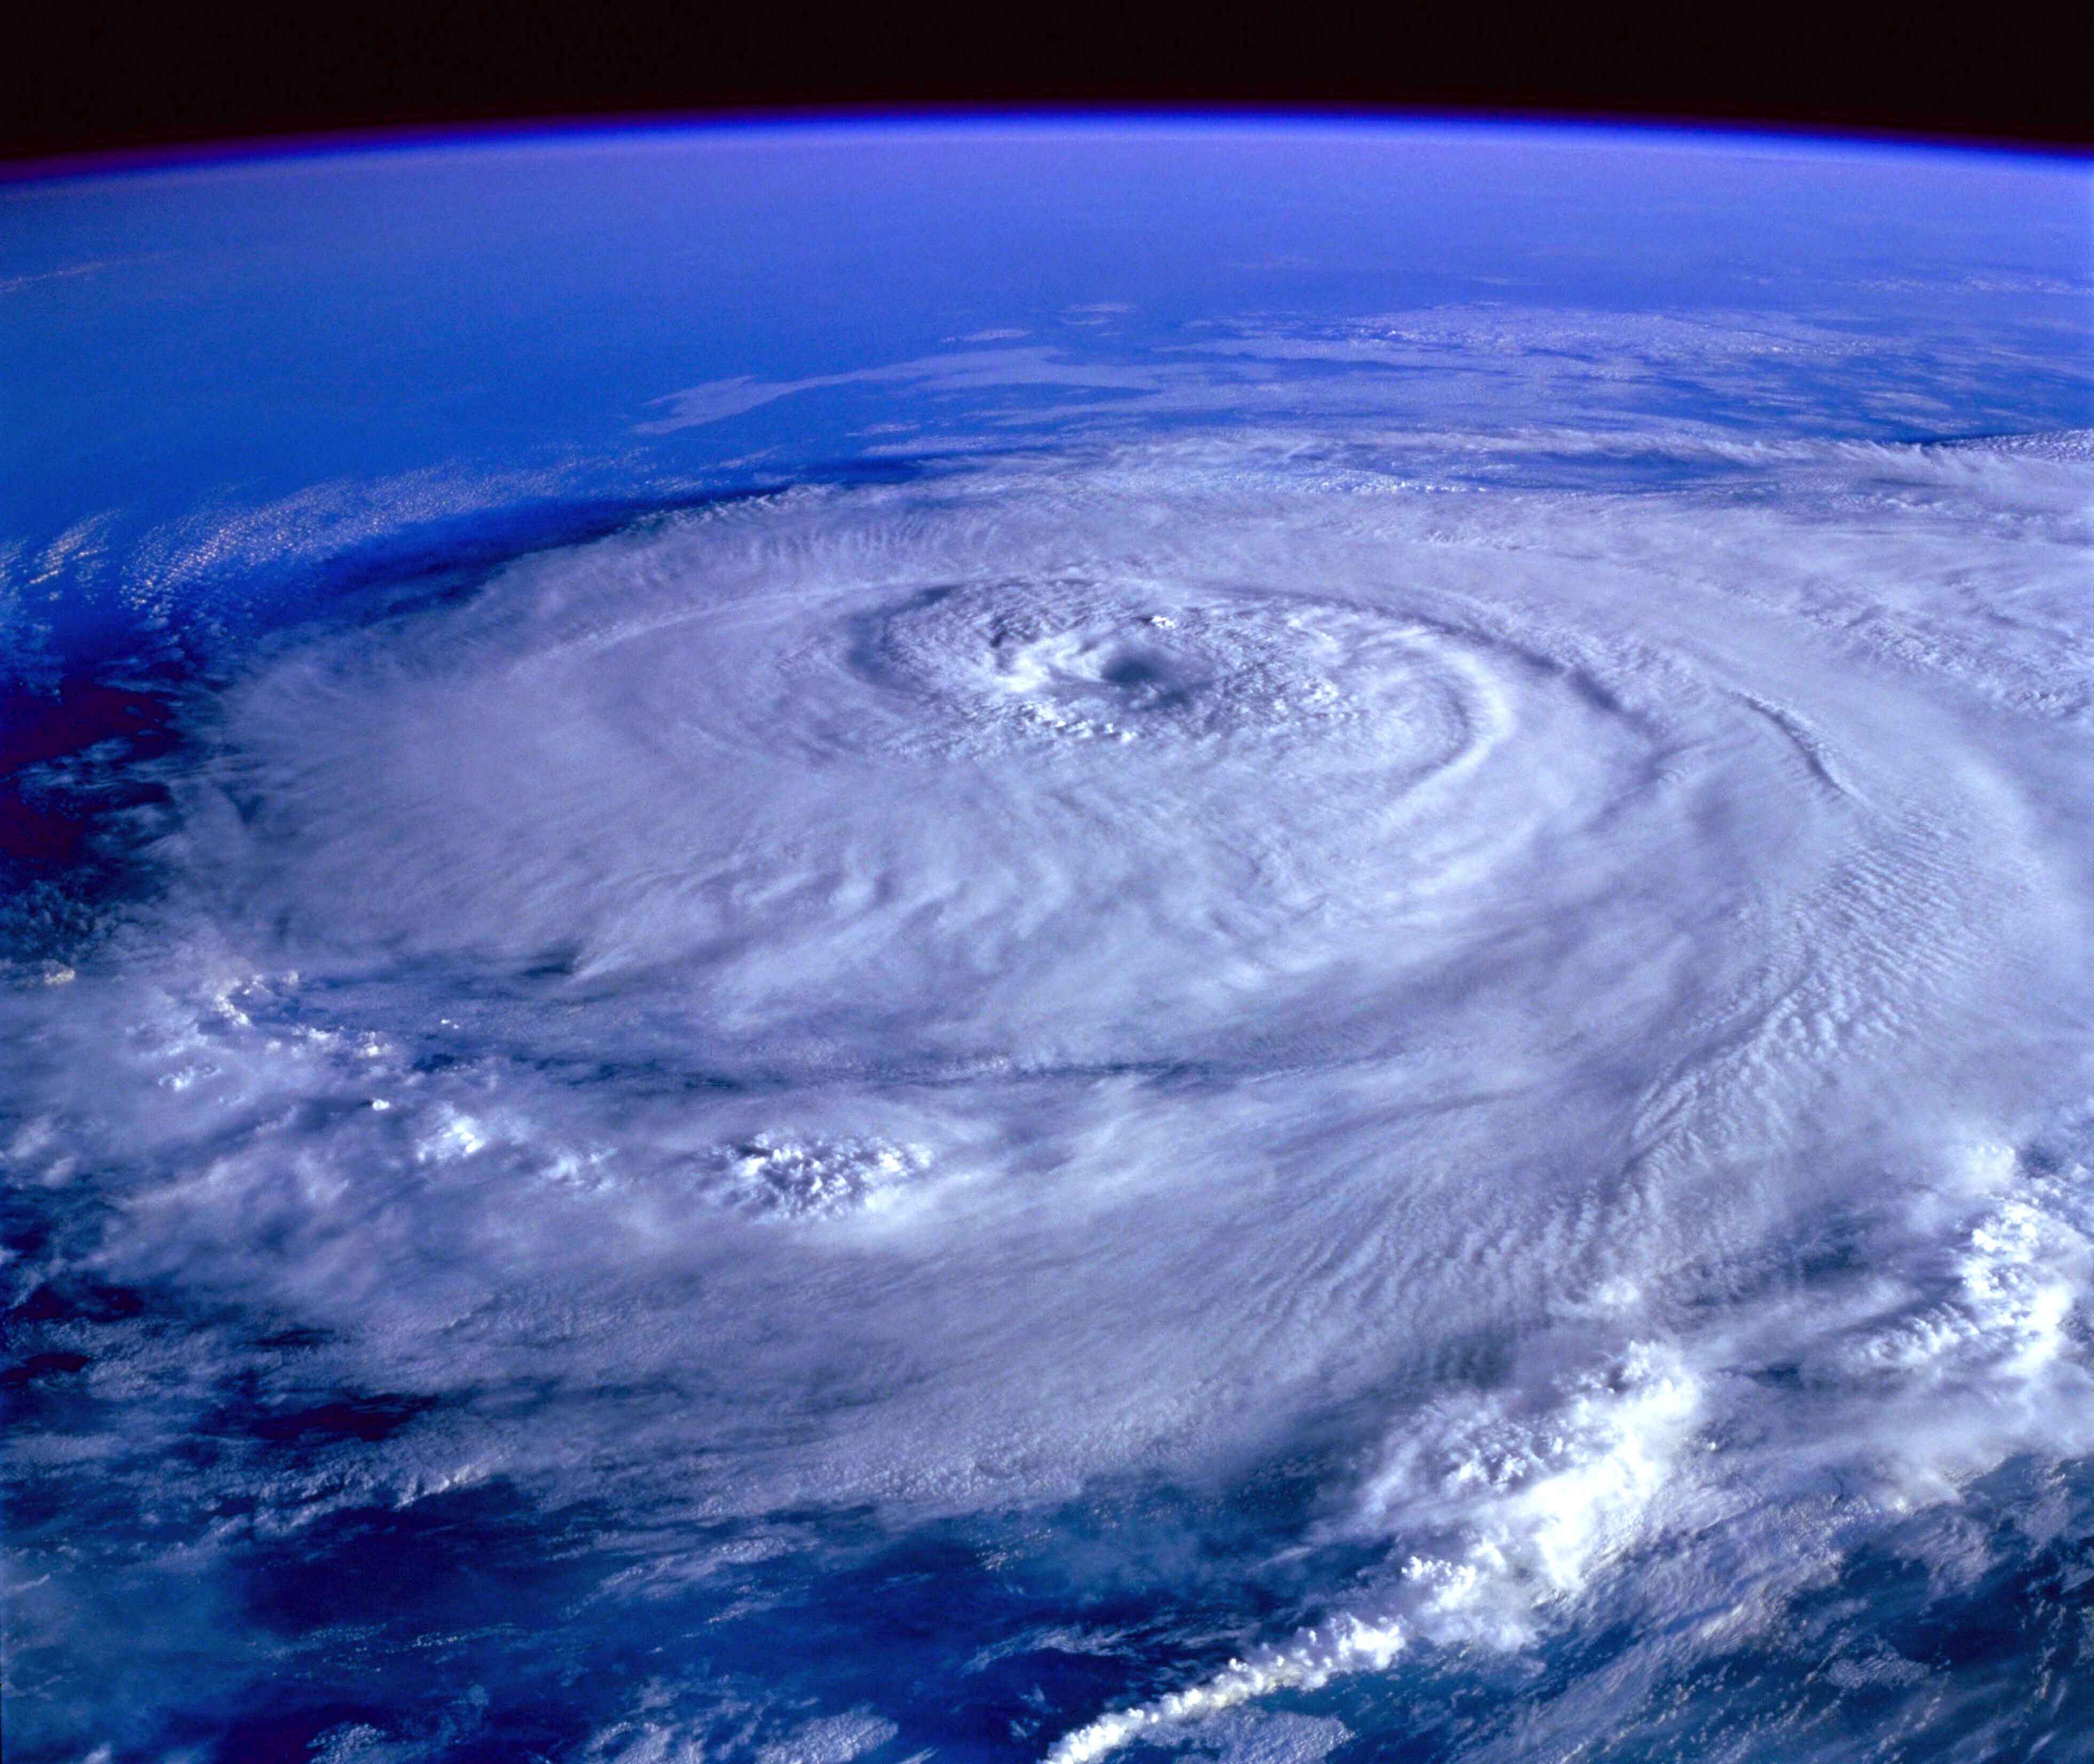 A large hurricane seen from space